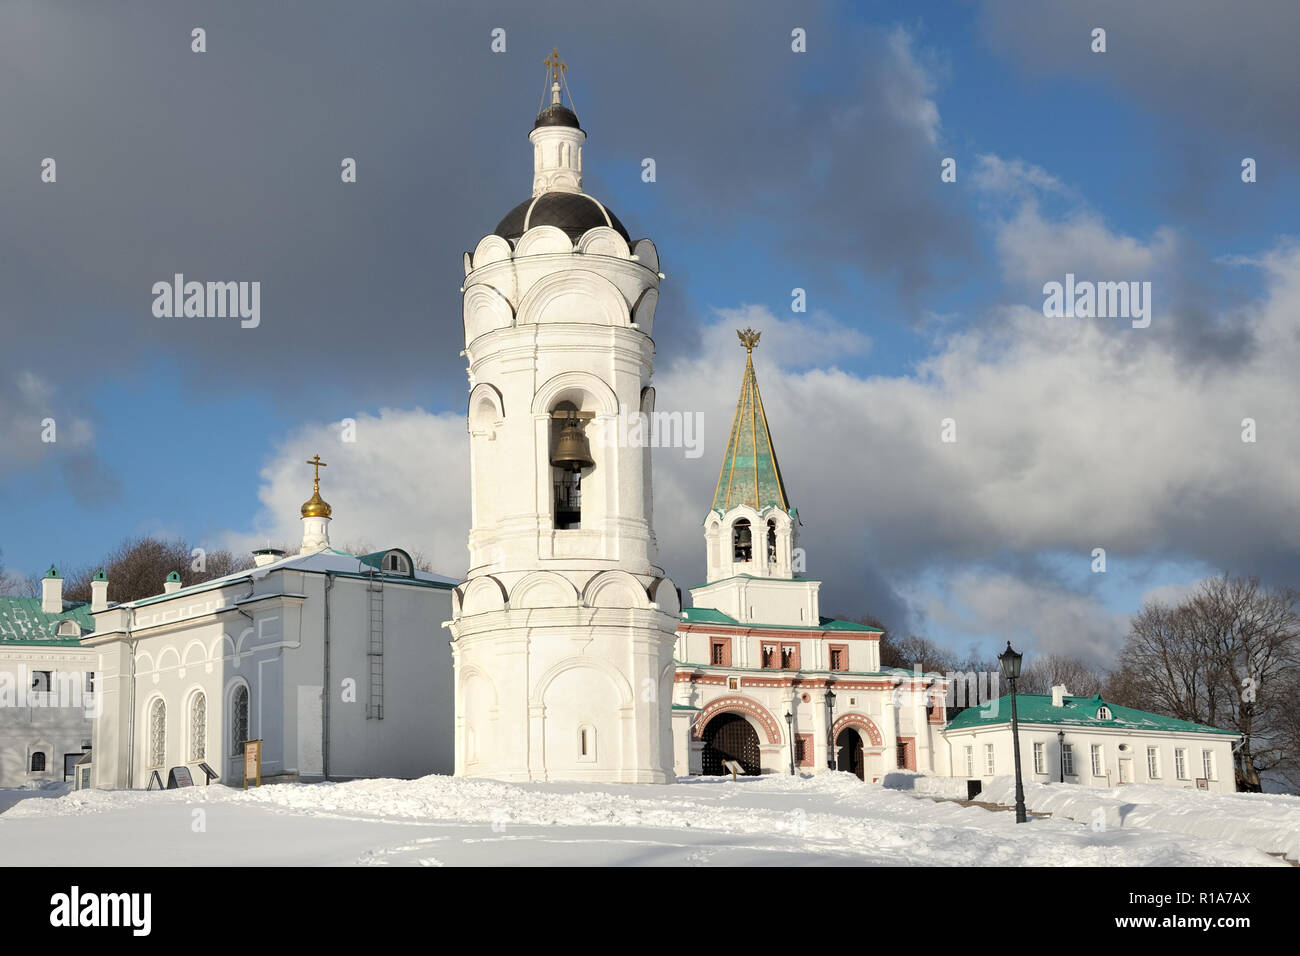 Bell Tower of the Church of St. George in Kolomenskoye in Winter Stock Photo